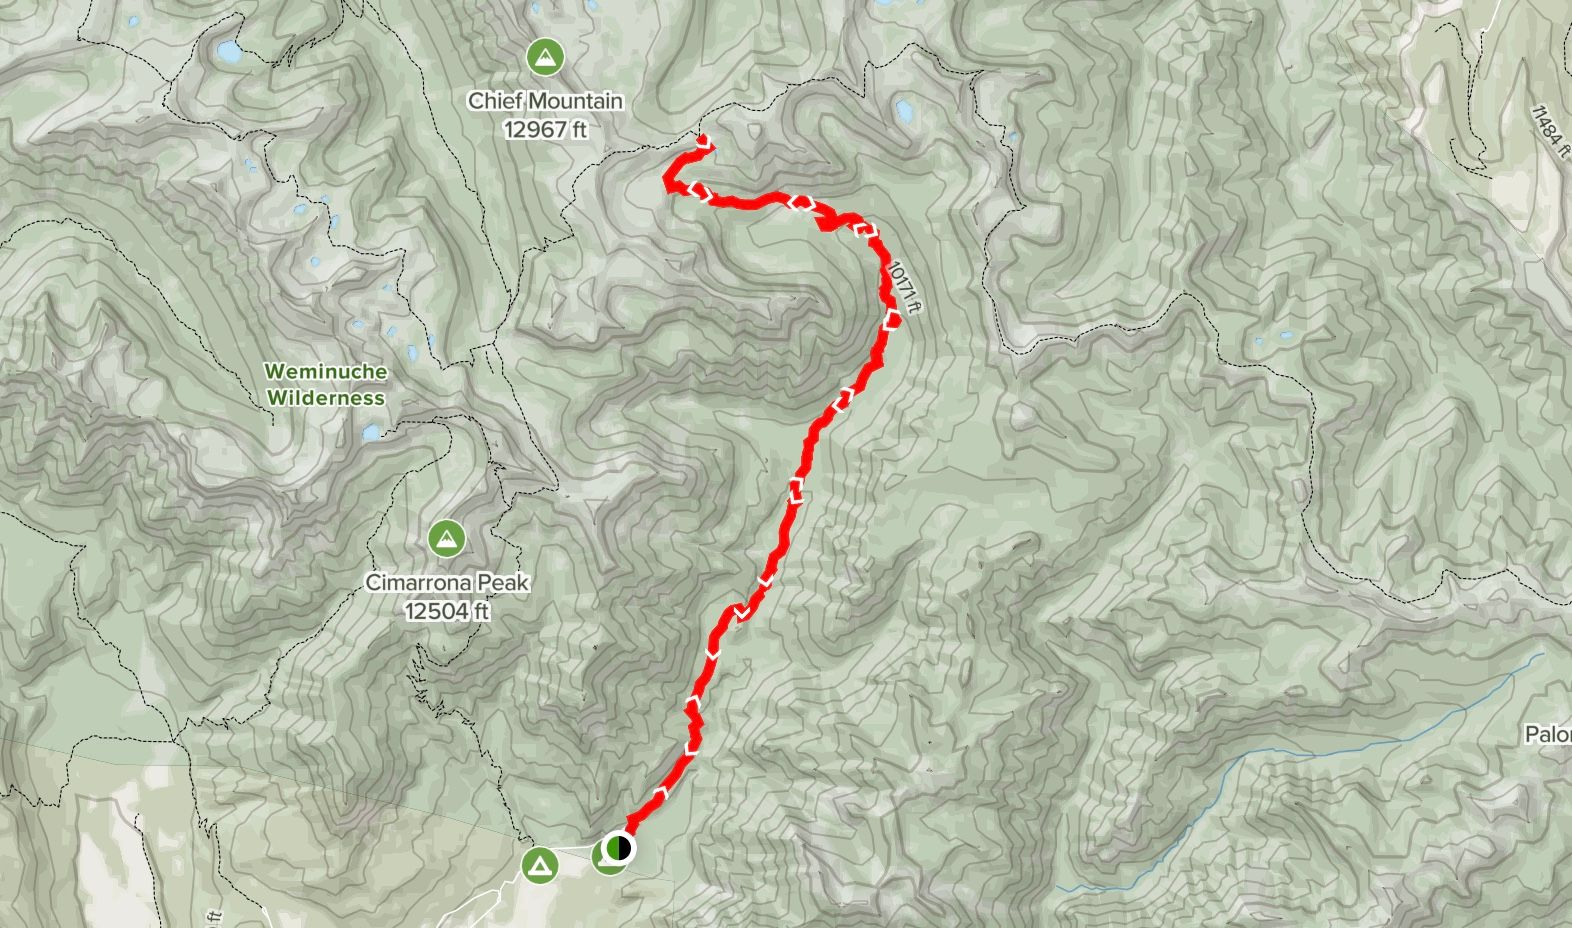 Our trail plan overlaid on a topographical map of the Weminuche Wilderness.